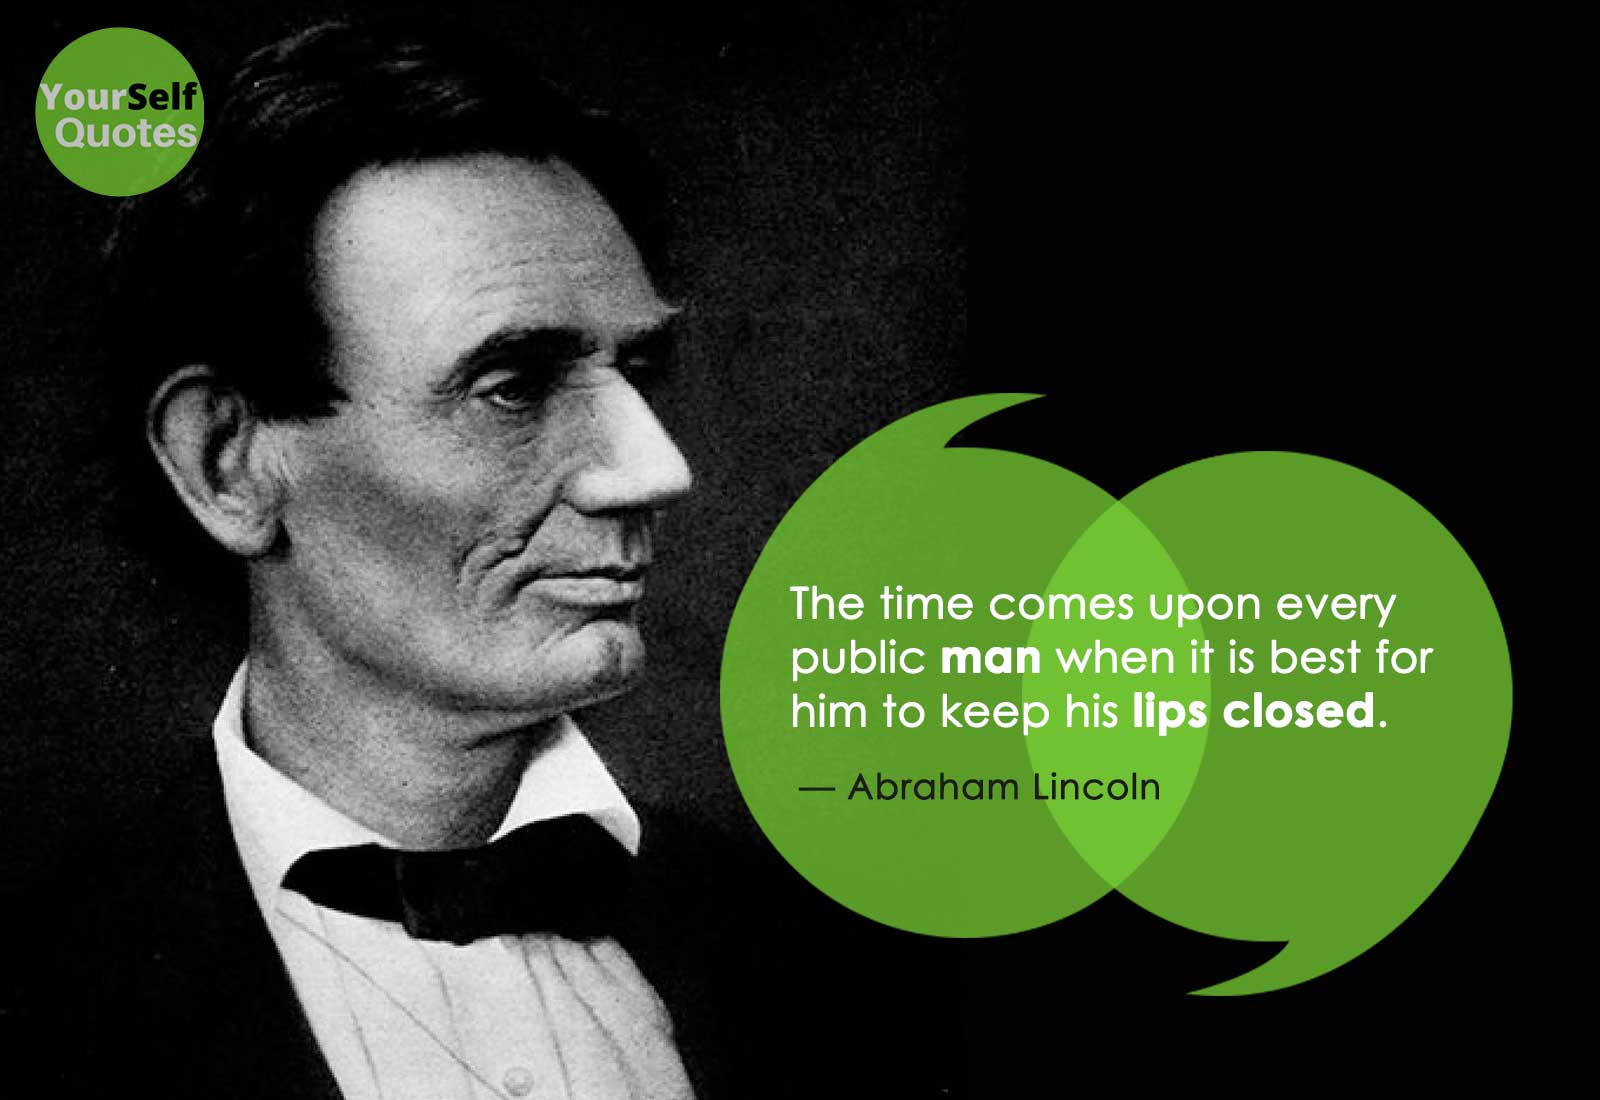 Famous Abraham Lincoln Quotes